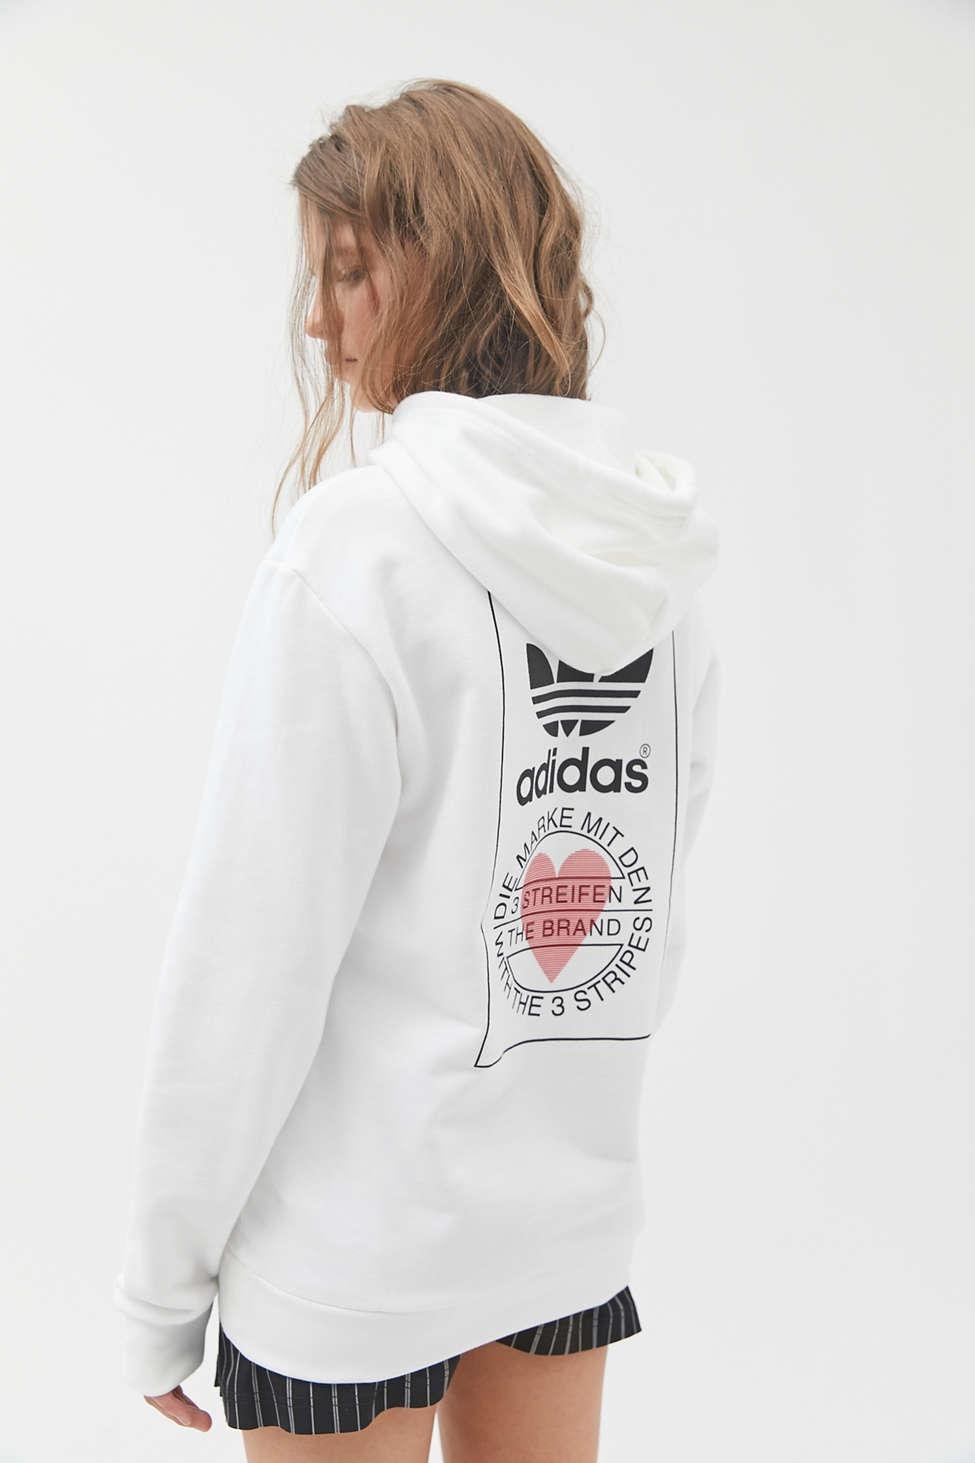 adidas The Brand With The 3 Stripes Hoodie Sweatshirt - Lyst